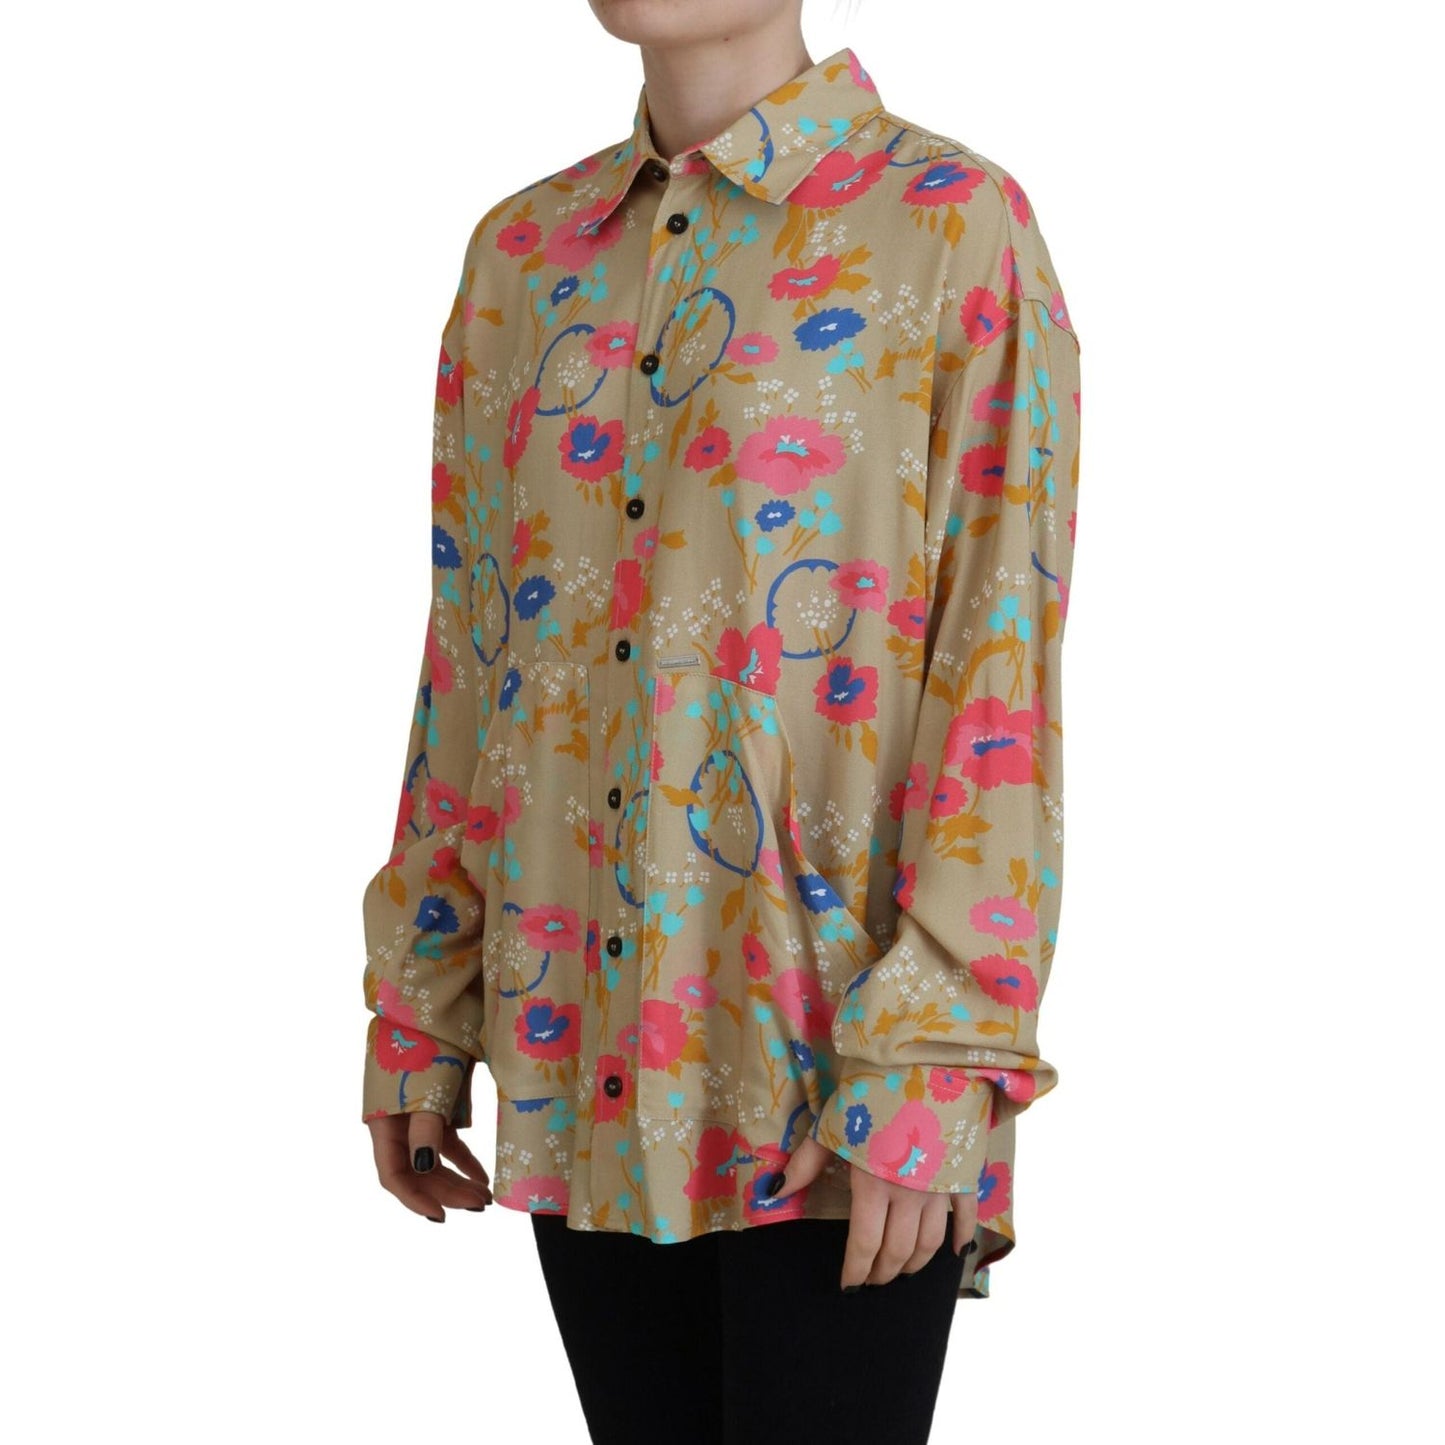 Dsquared² Beige Floral Collared Button Down Long Sleeves Shirt beige-floral-collared-button-down-long-sleeves-shirt